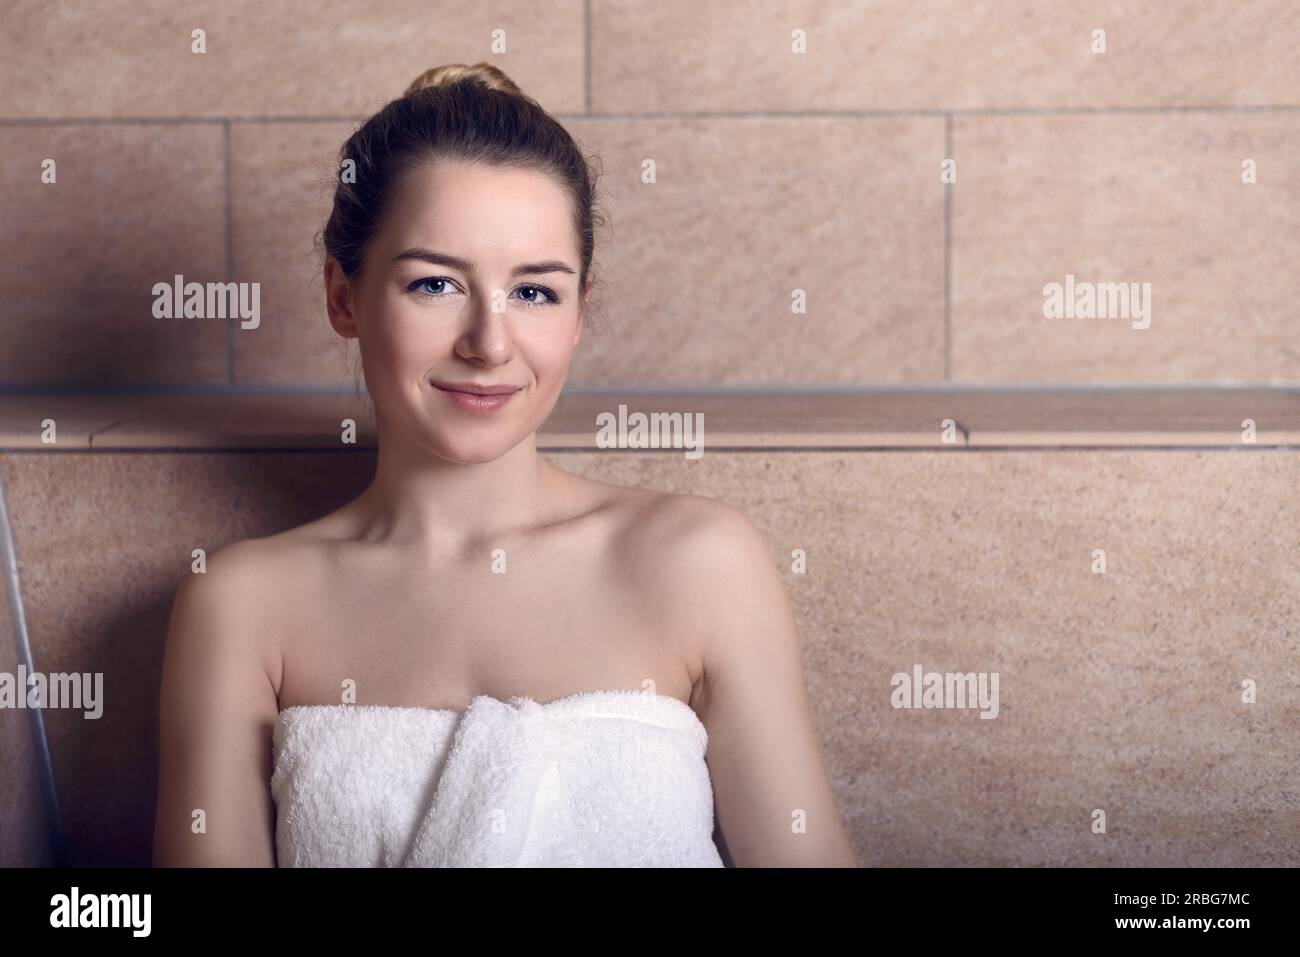 Attractive smiling young woman in a bath towel wrapped around her chest standing in a light brown tiled bathroom in a health and beauty concept Stock Photo